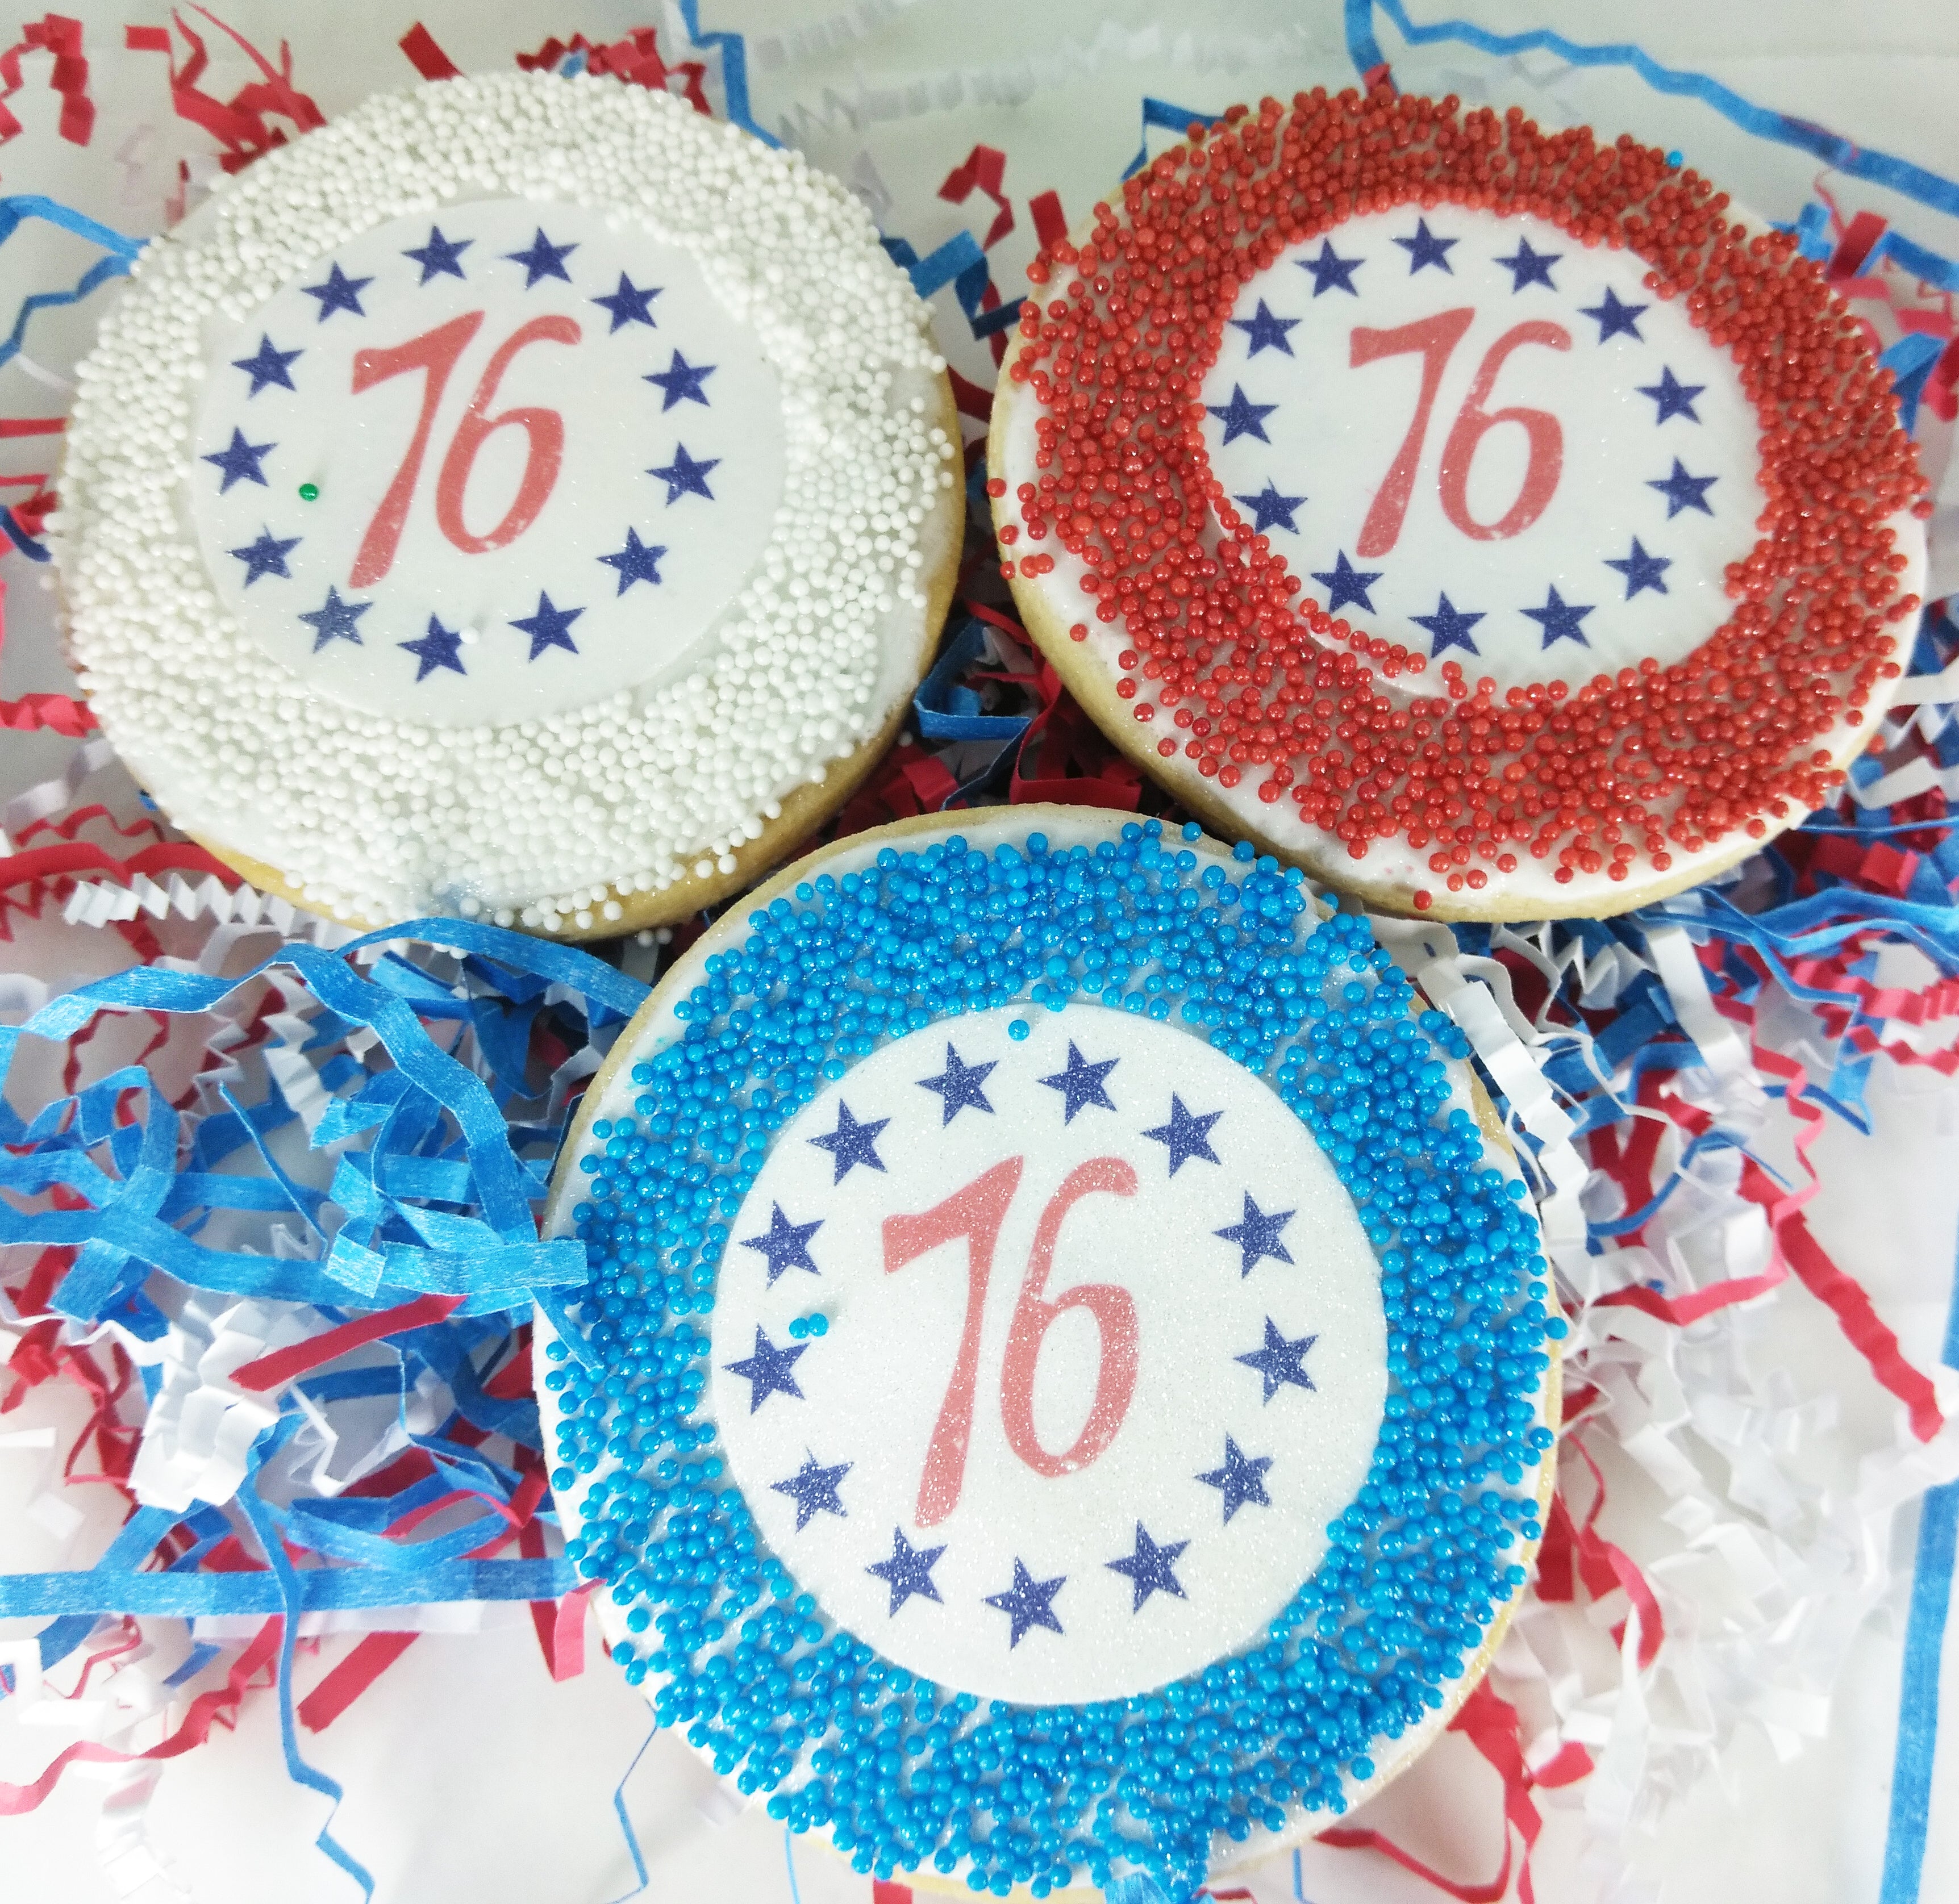 'Independence Day July 4th "76" Cookies